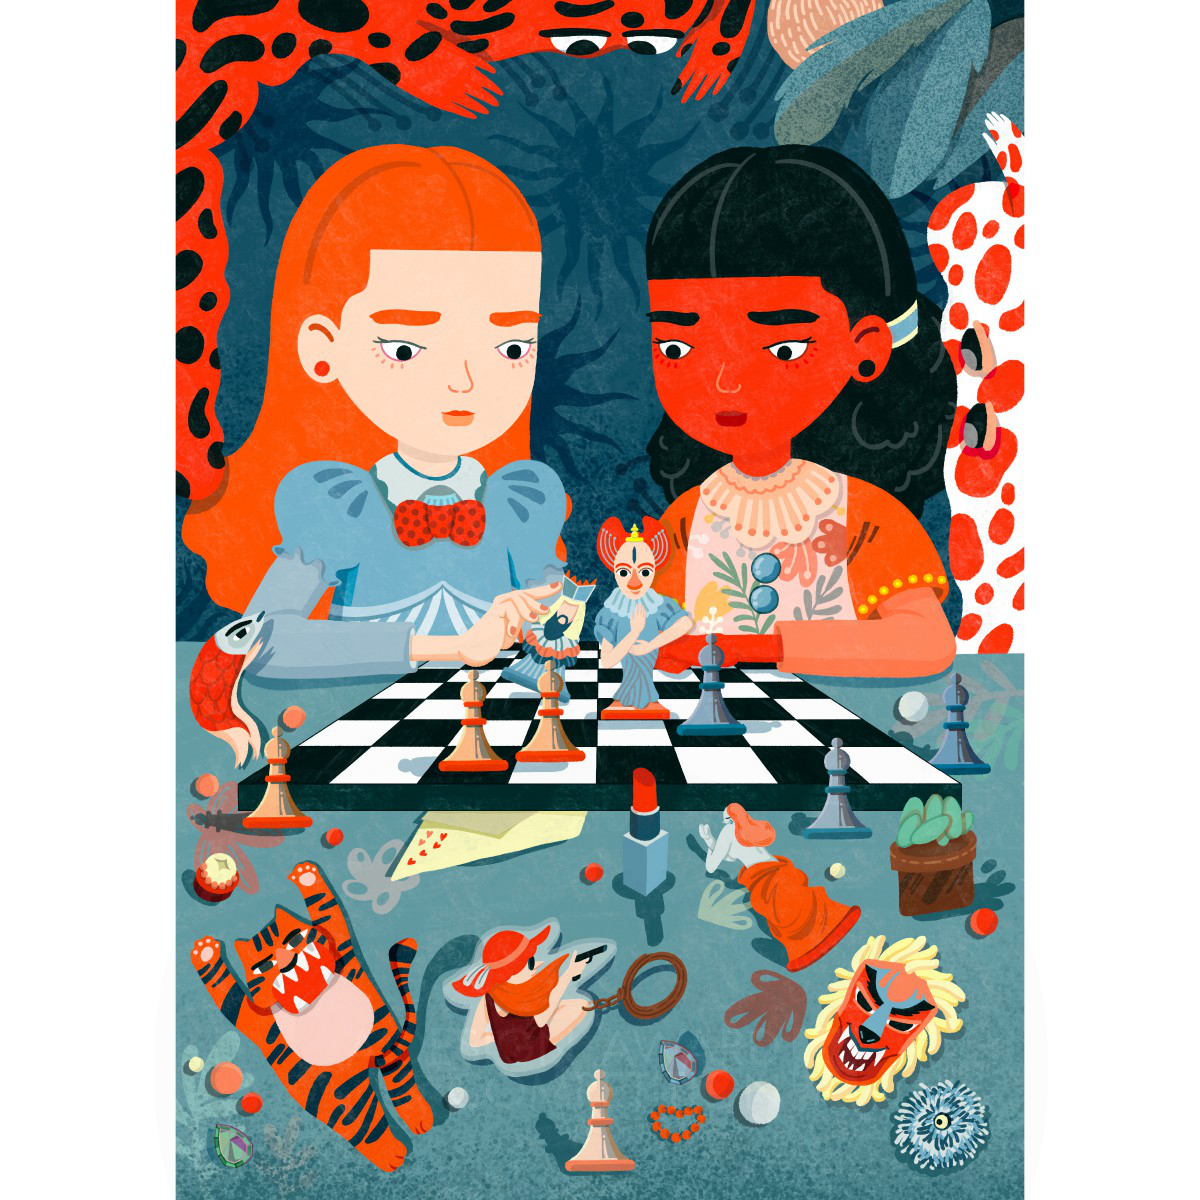 Girls with Chess Editorial Illustration by Mengyao GUO